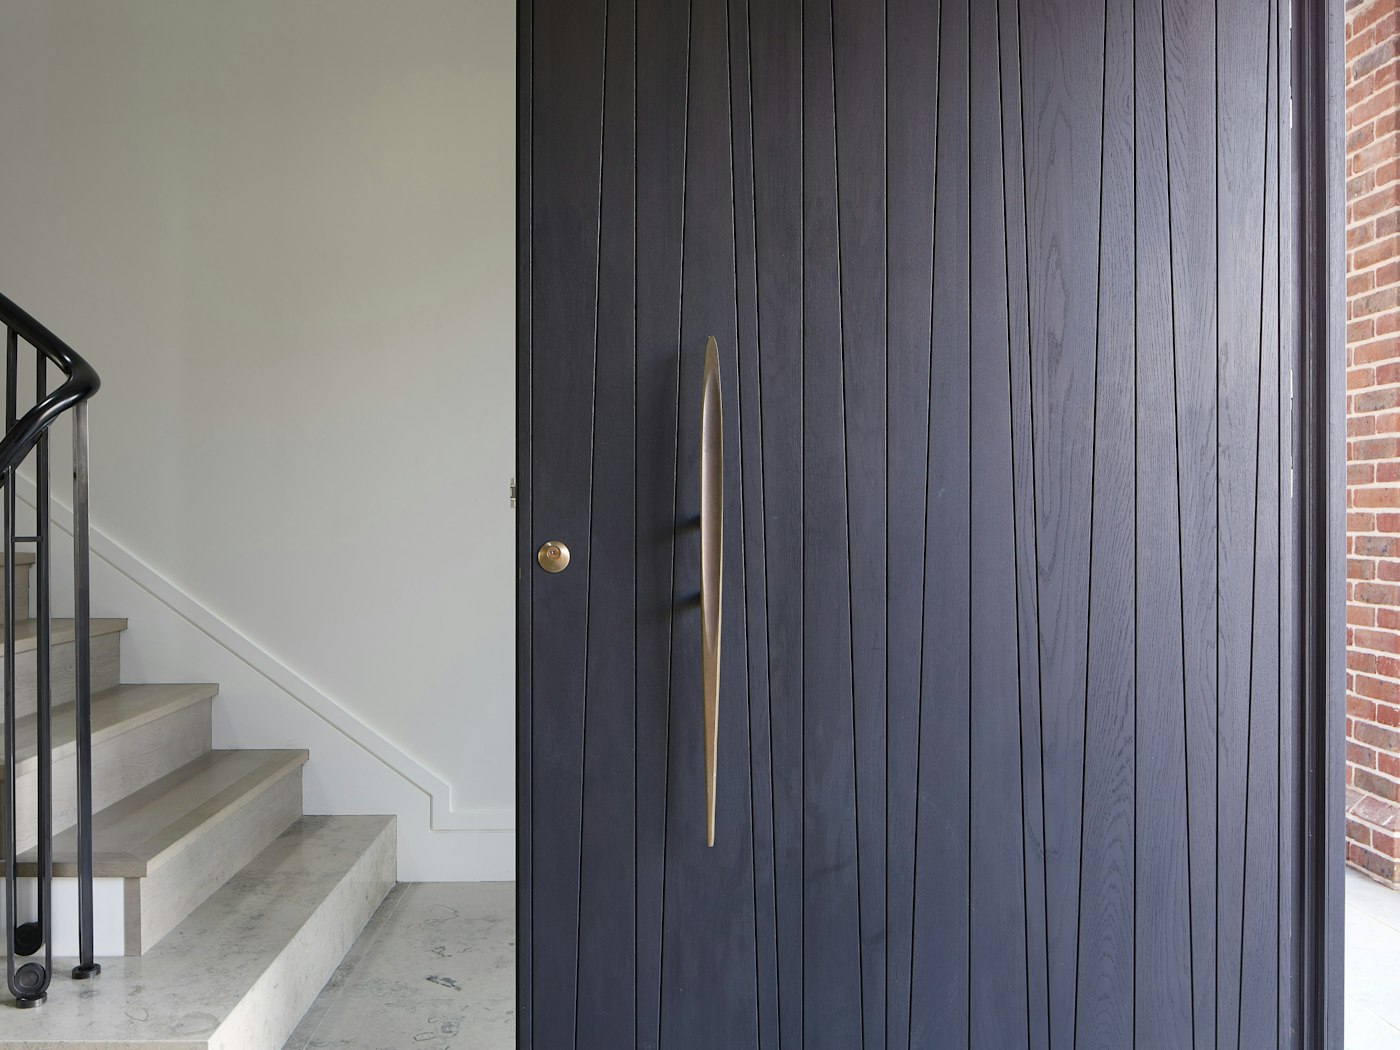 Choosing attractive and eyecatching door furniture can offer additional interest to doors not matching black cladding